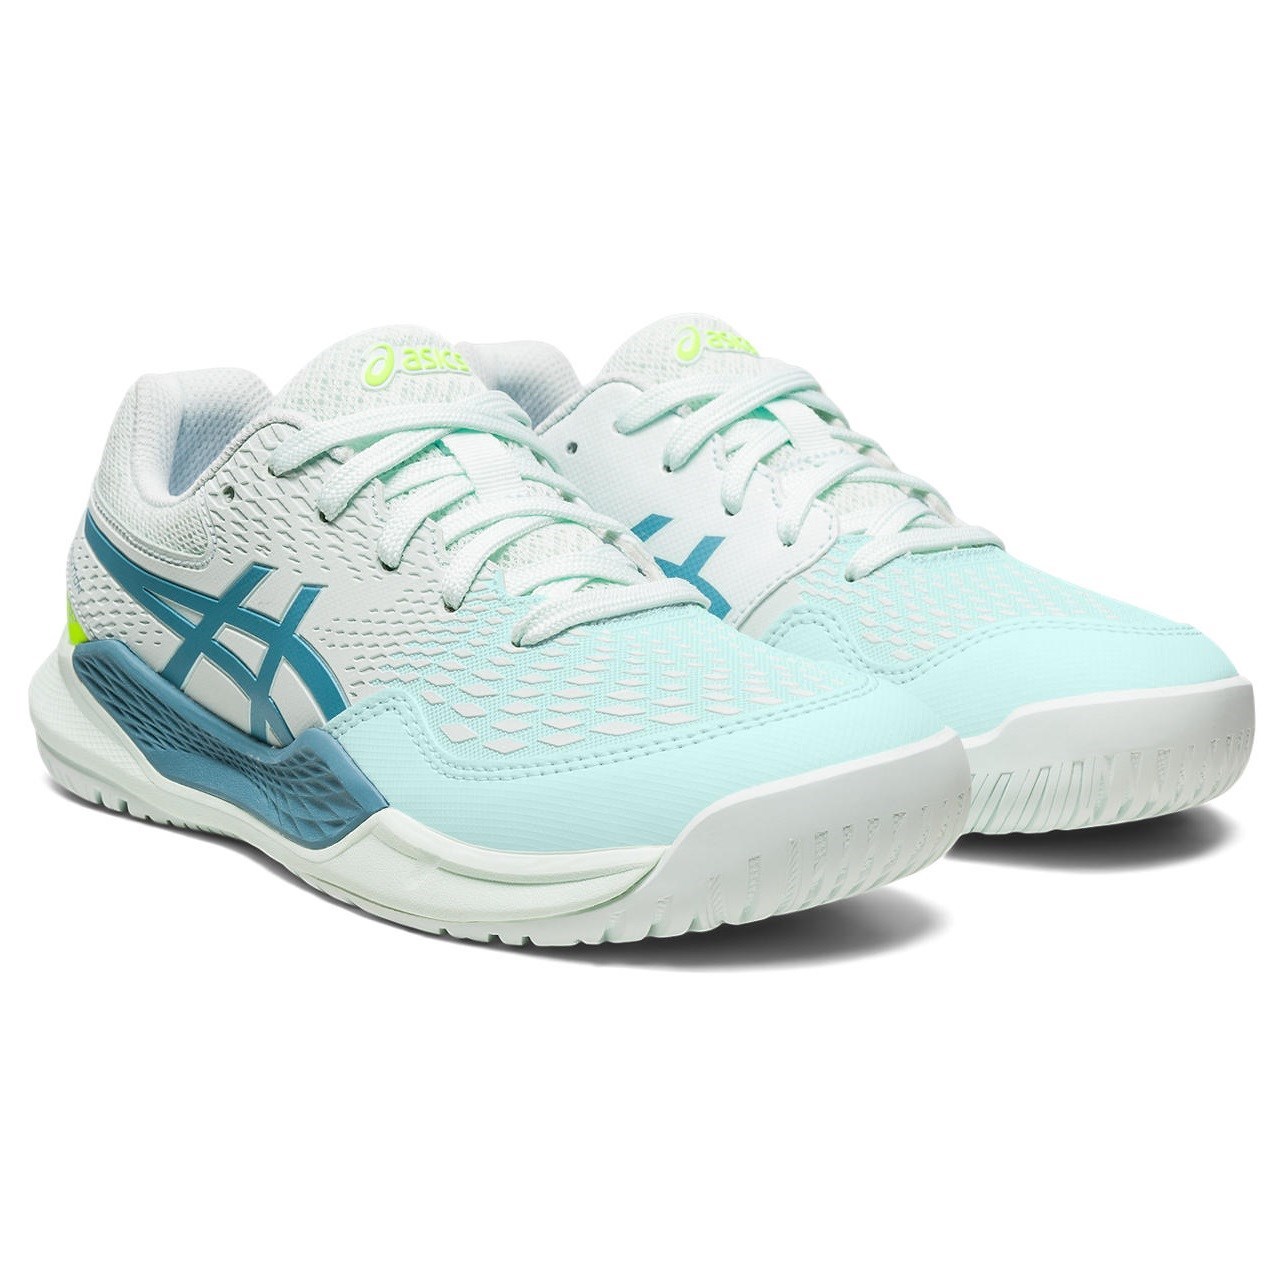 Asics Gel Resolution 9 GS - Kids Tennis Shoes - Soothing Sea/Gris Blue ...